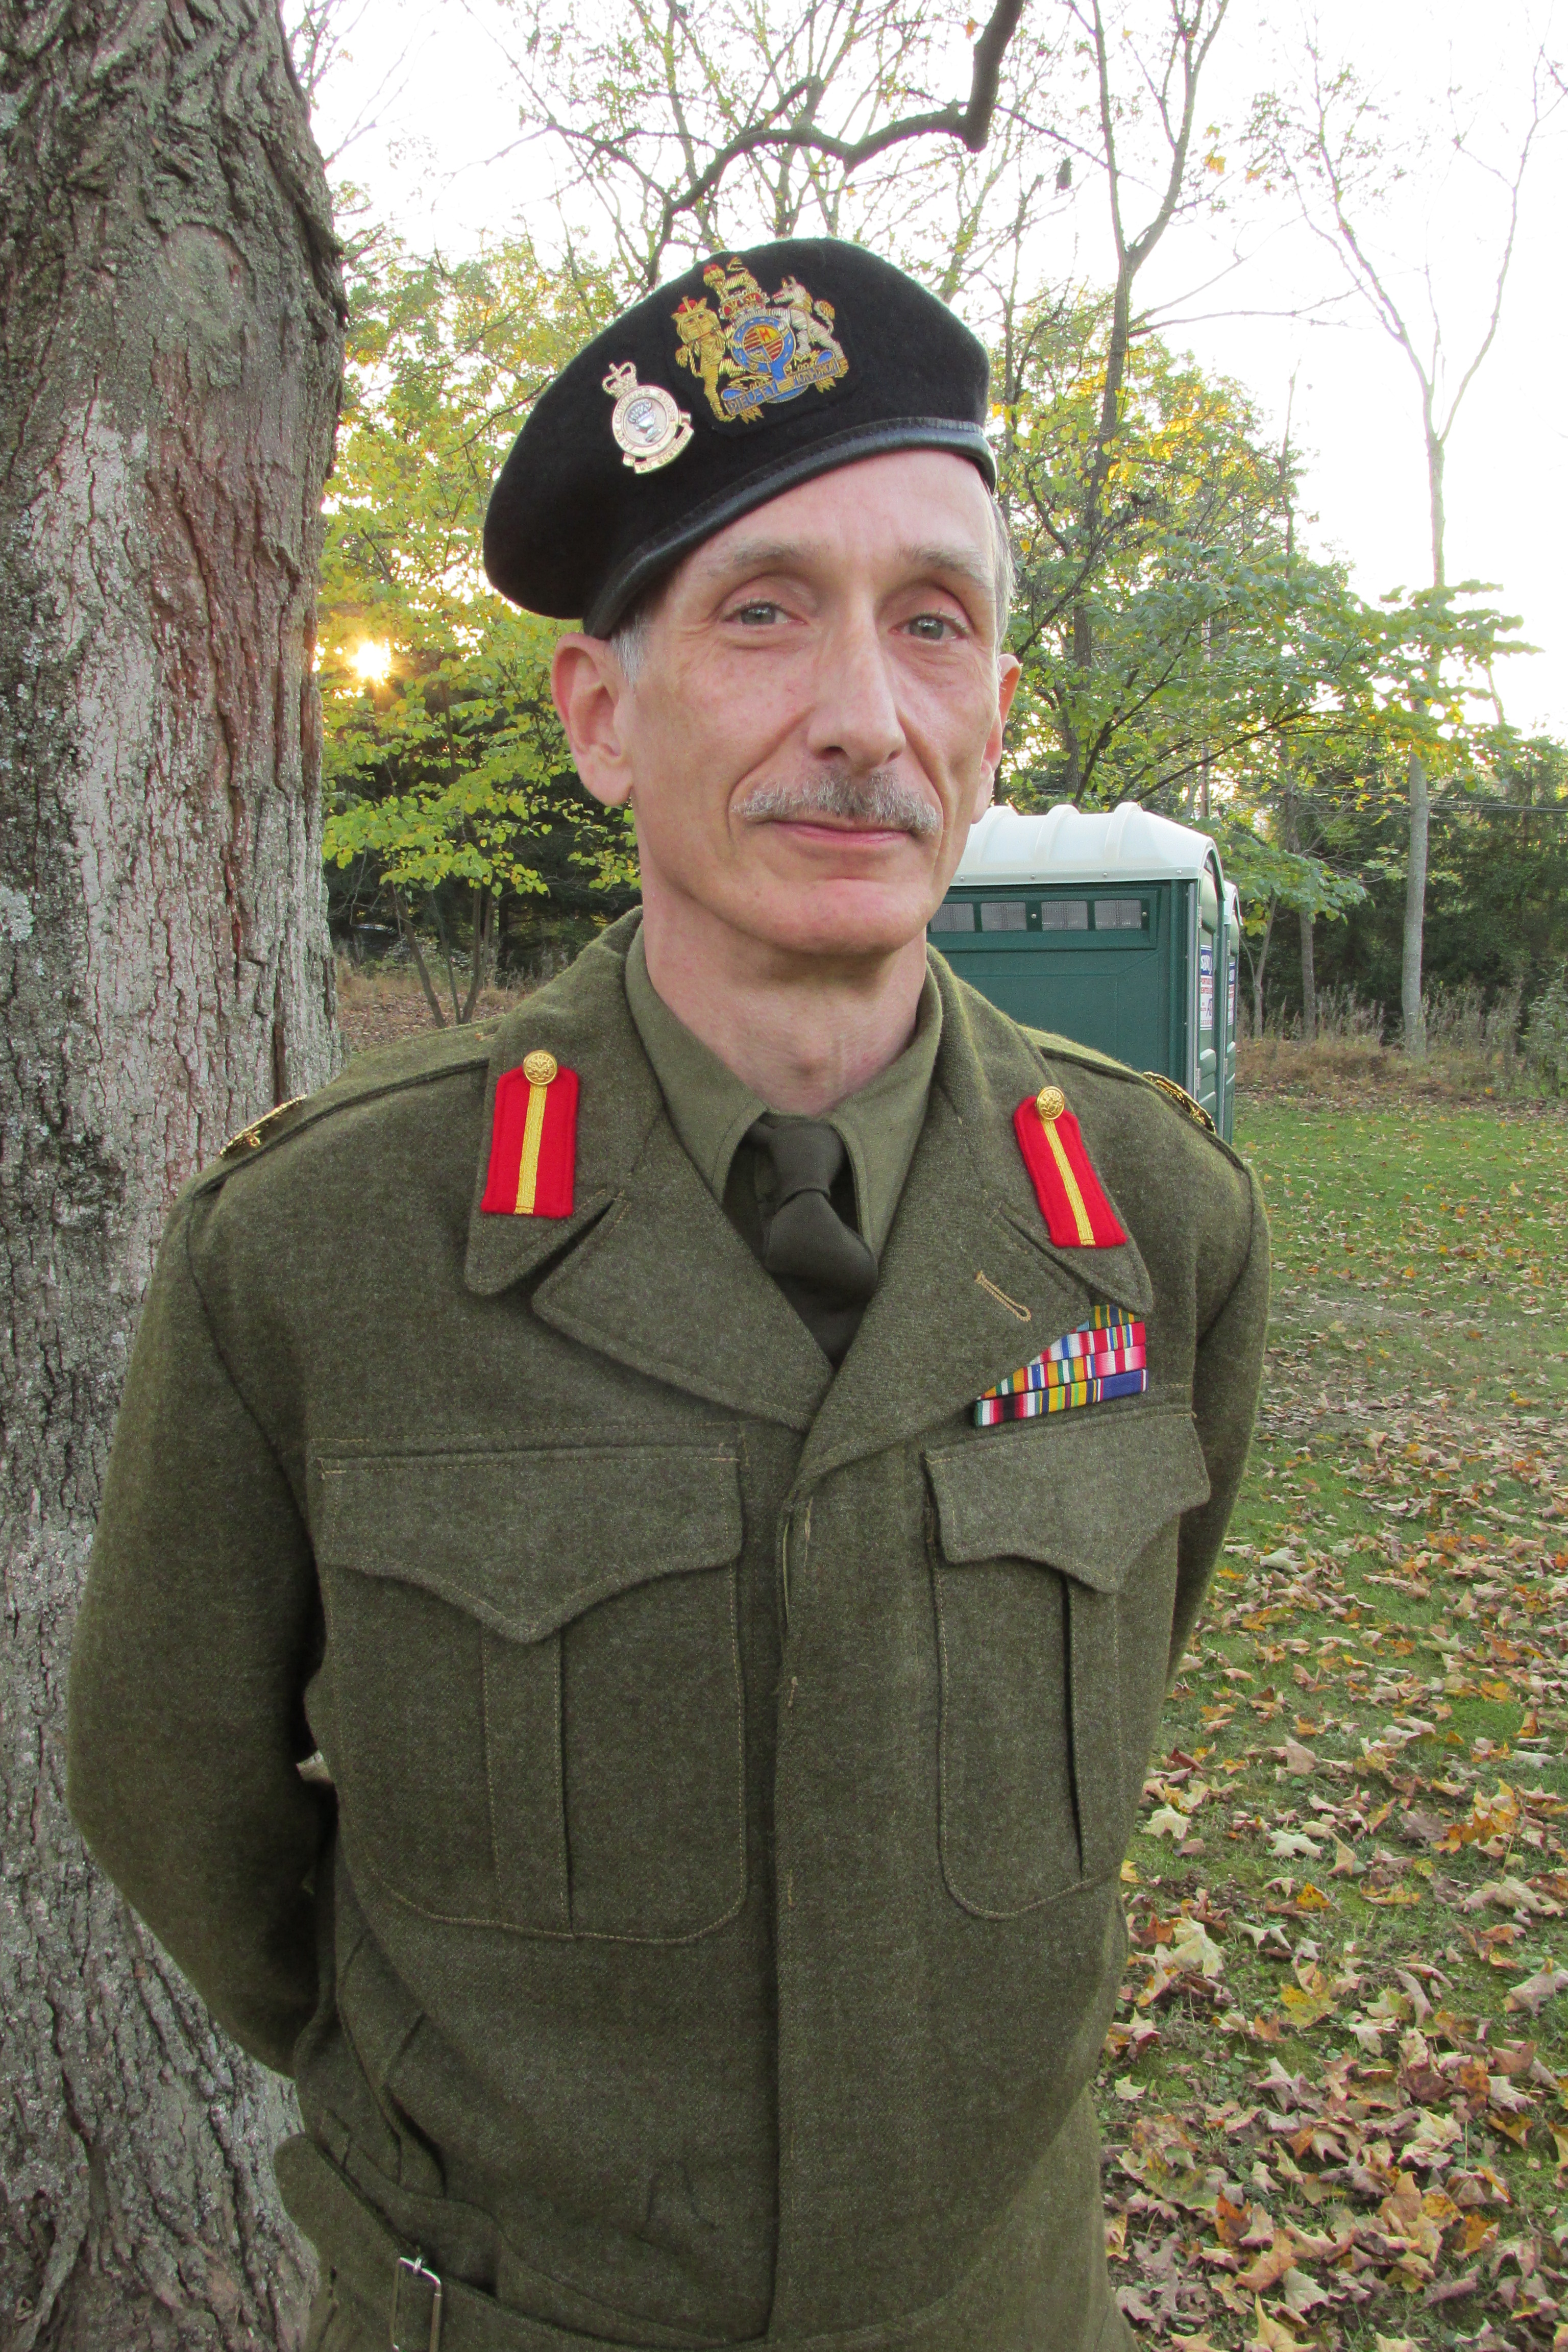 Joseph K Bevilacqua as British General Bernard Montgomery WWII for The Wars - History Channel series